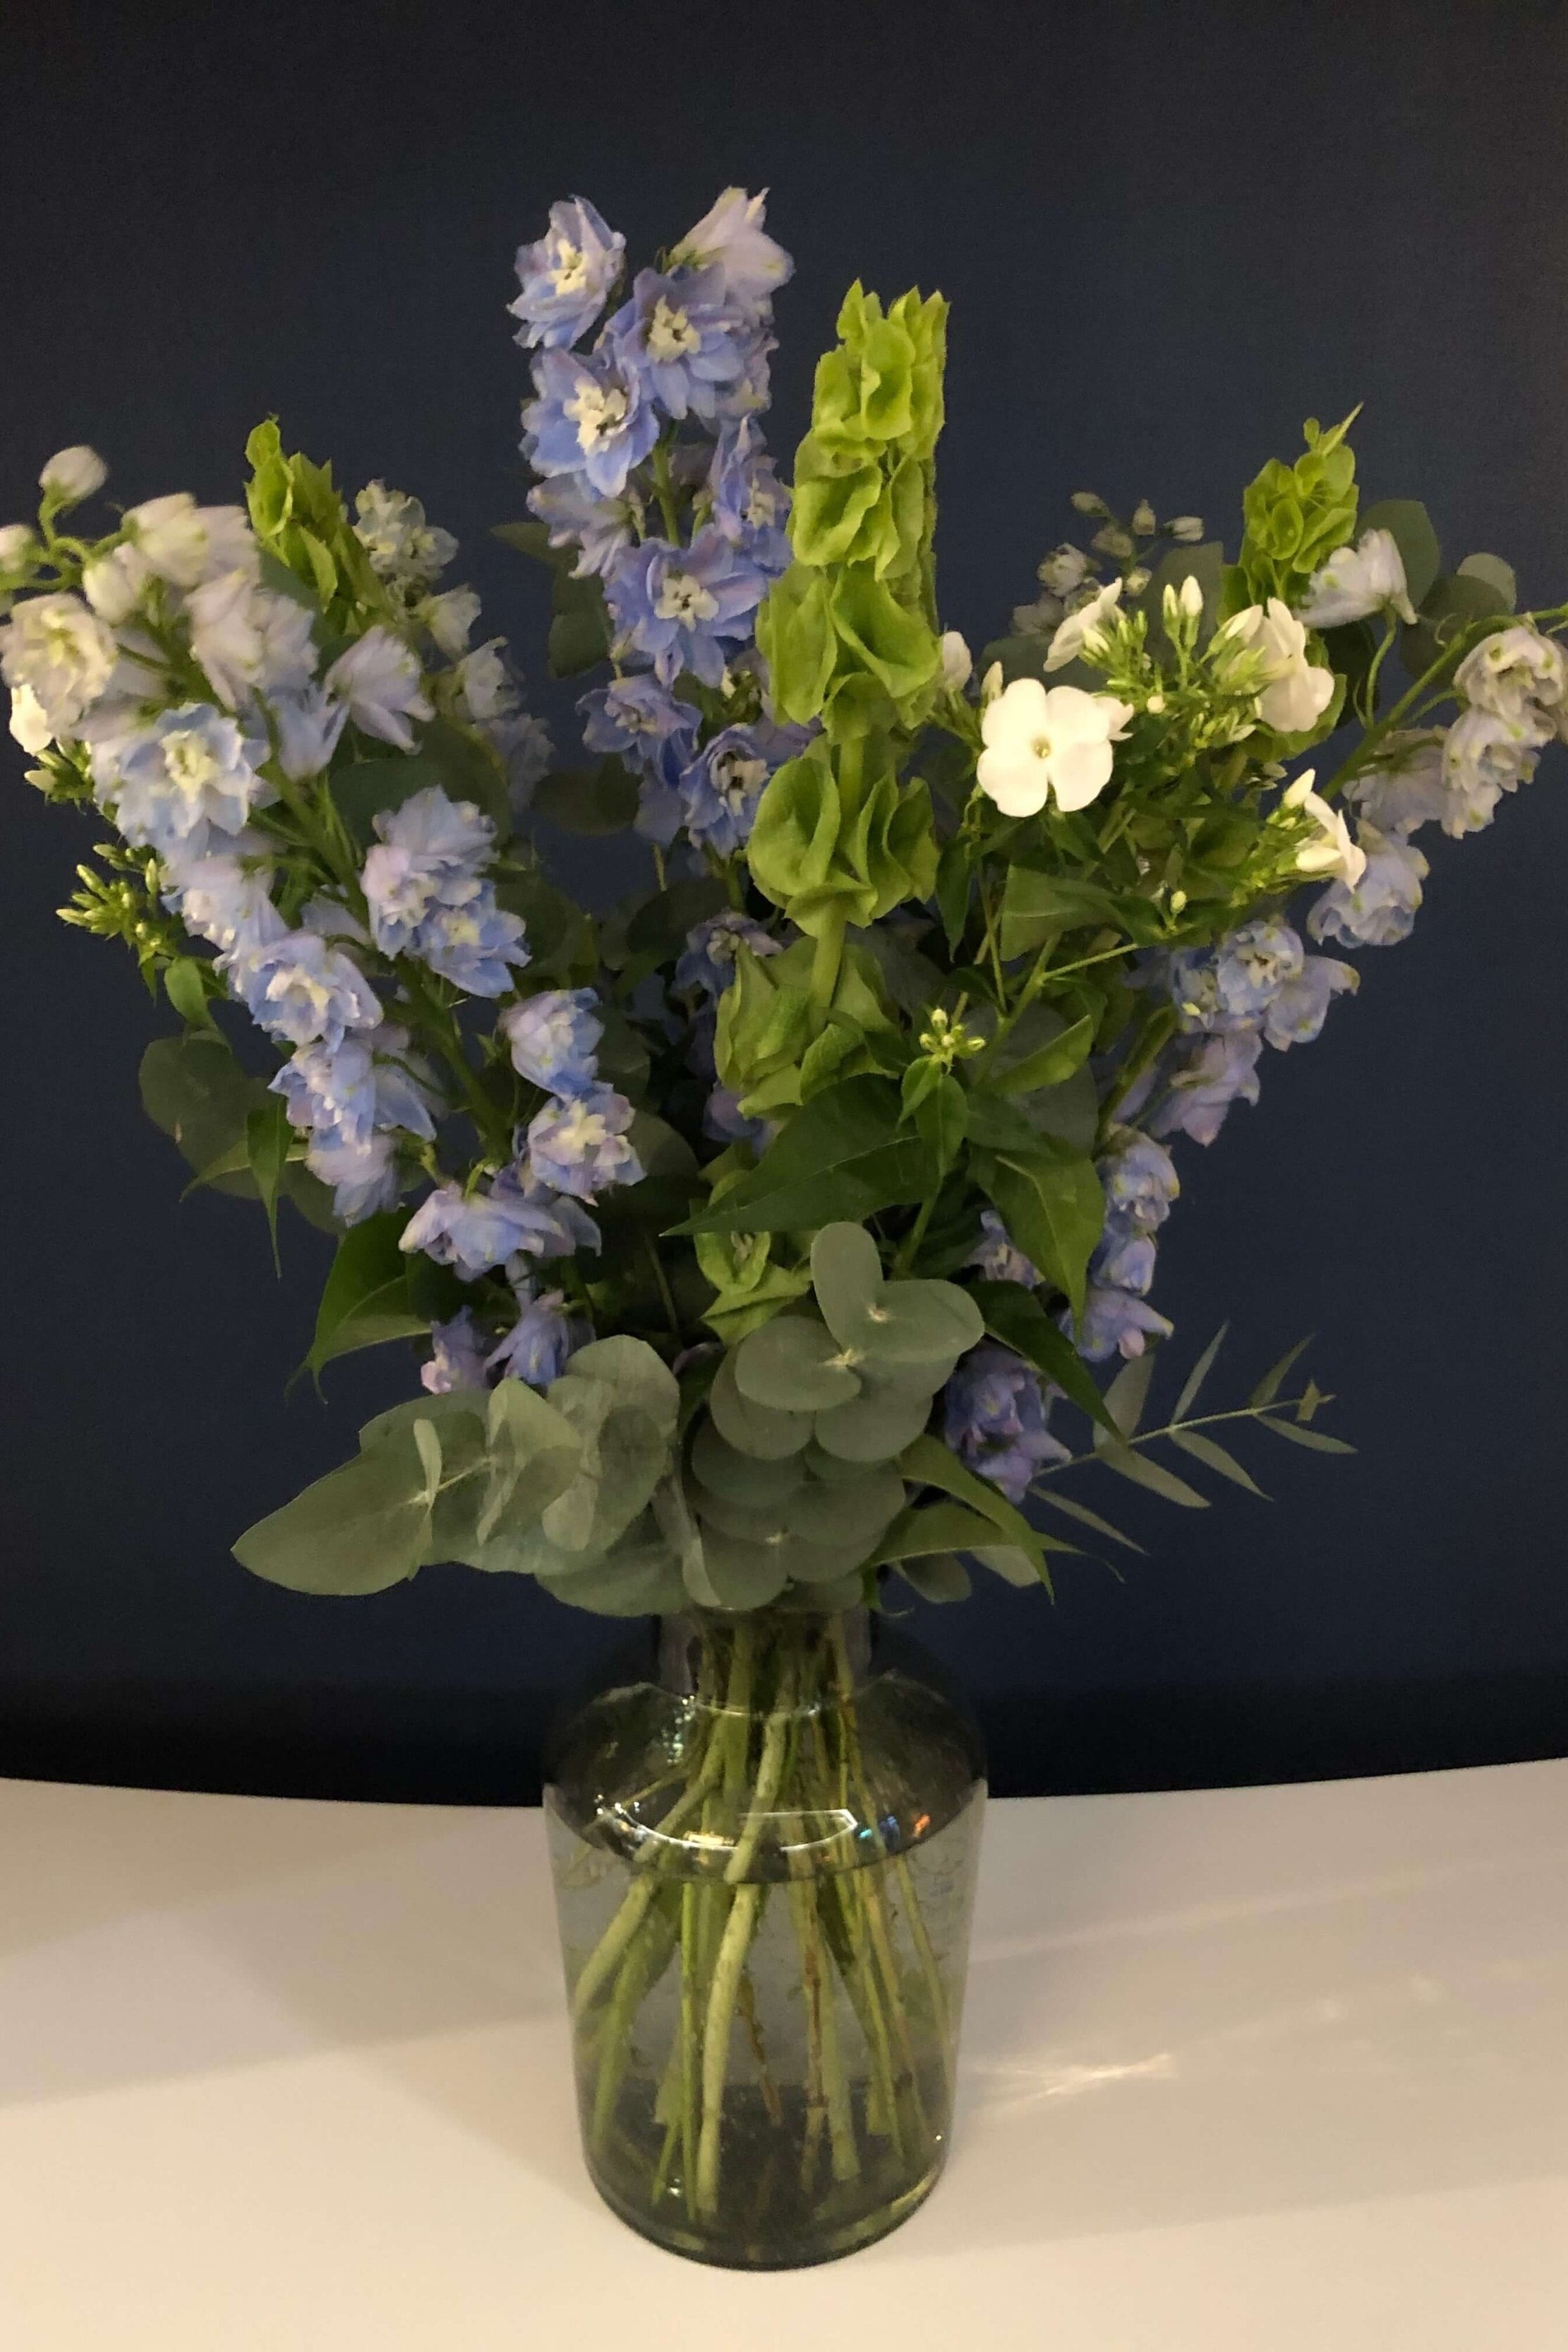 White and Blue Corporate floral bouquet